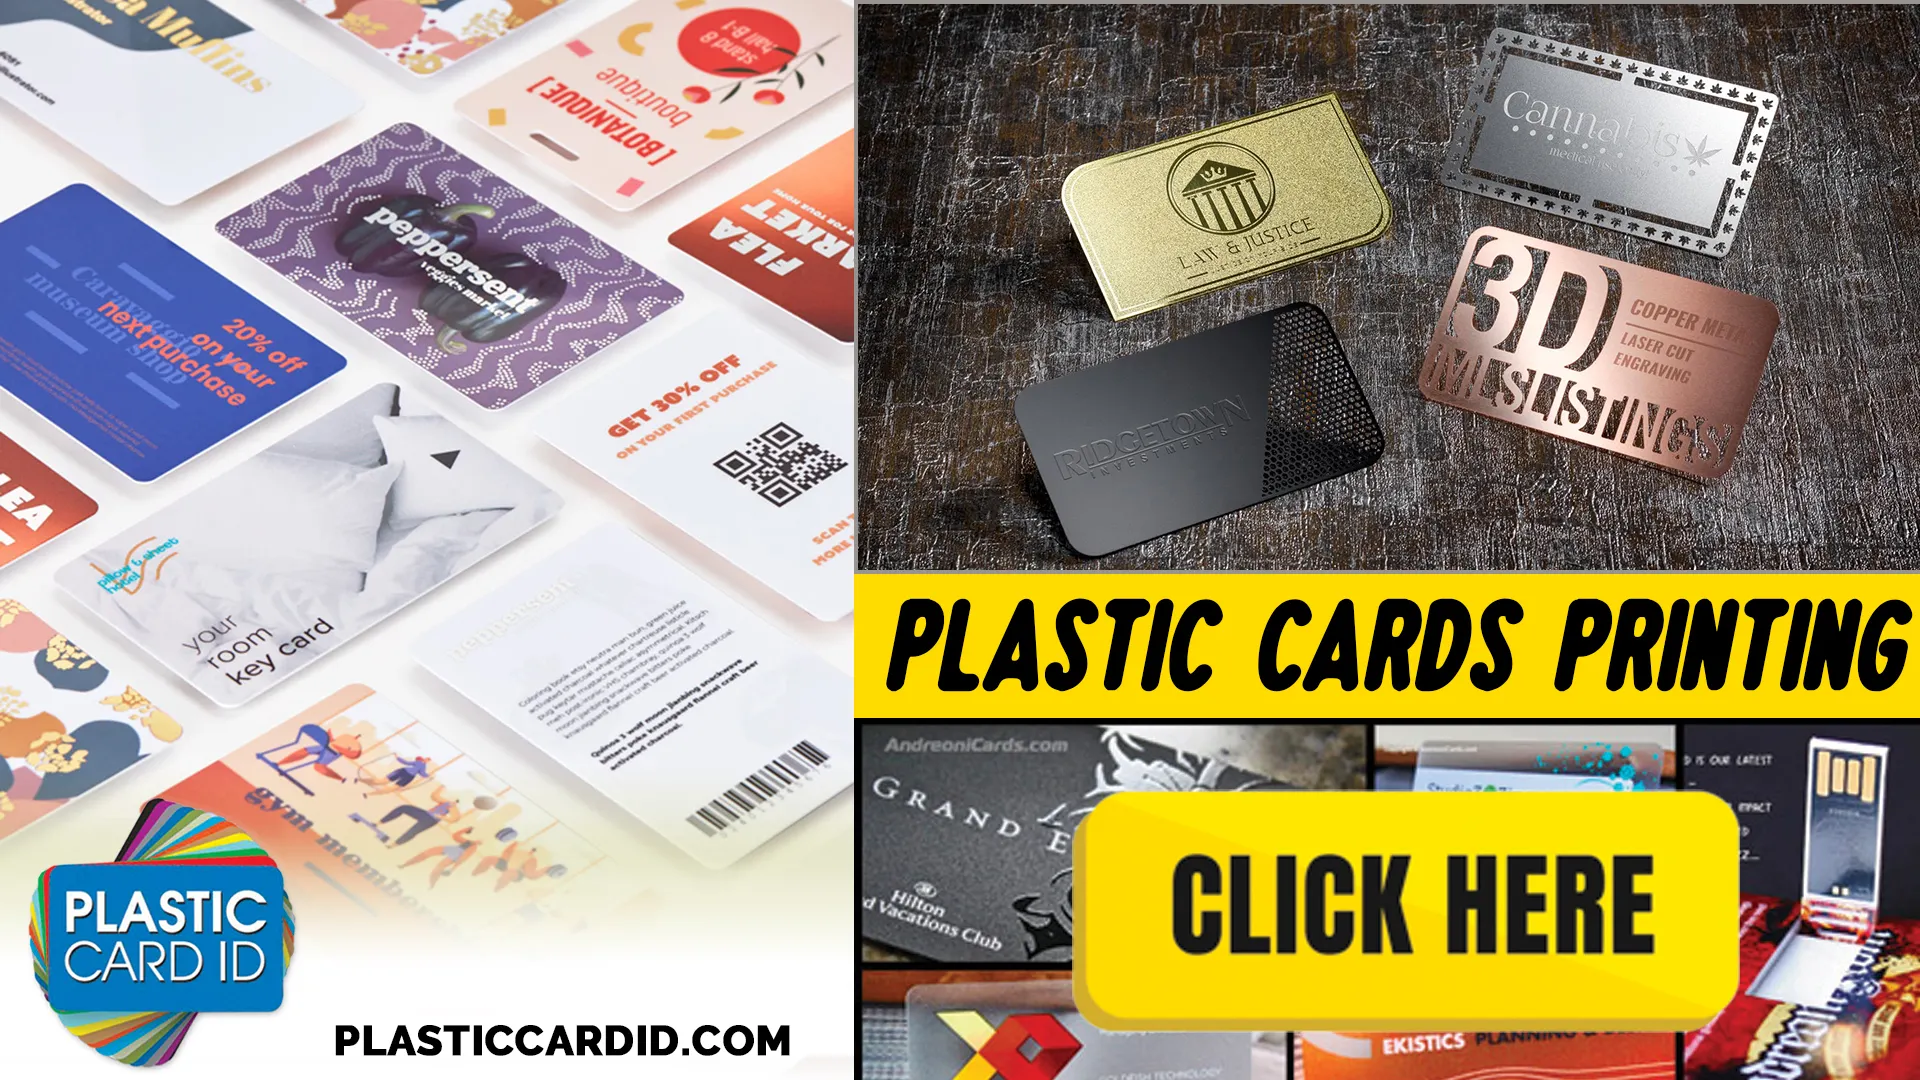 The Correct Way to Clean and Disinfect Your Plastic Cards